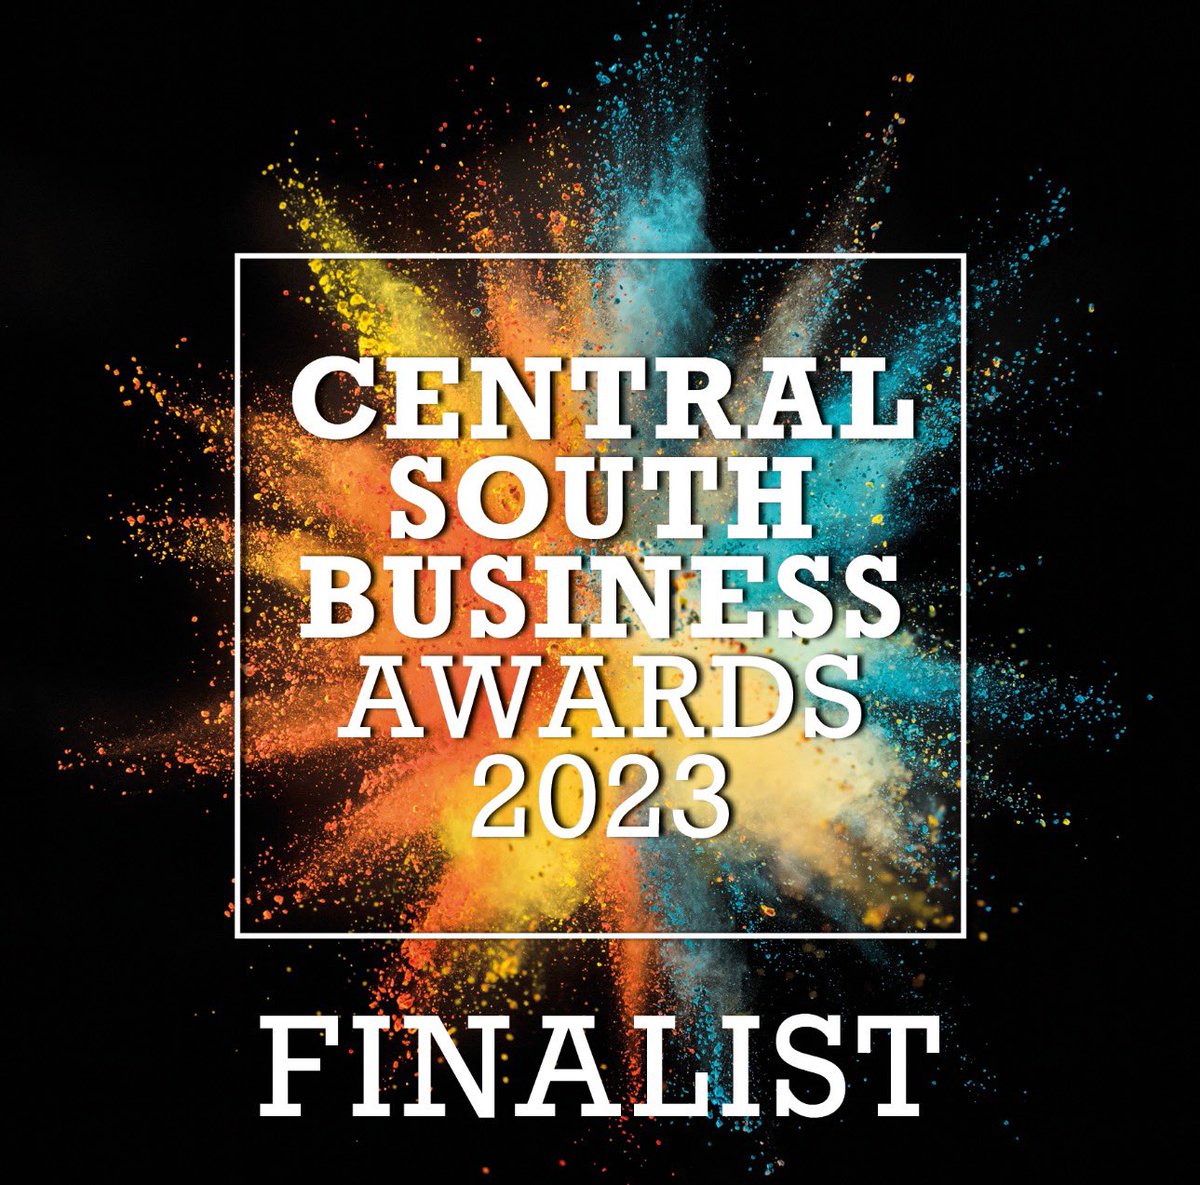 📣 Proud to be selected as a #Finalist at the #CentralSouthUK #Awards 🏆 in the #International #Business of the #Year category, sponsored by @SOU_Airport 

#CSBAwards recognises excellence in business. @UKESG is among 48 #Finalists selected across 15 business categories. 🙏🏽🙏🏽